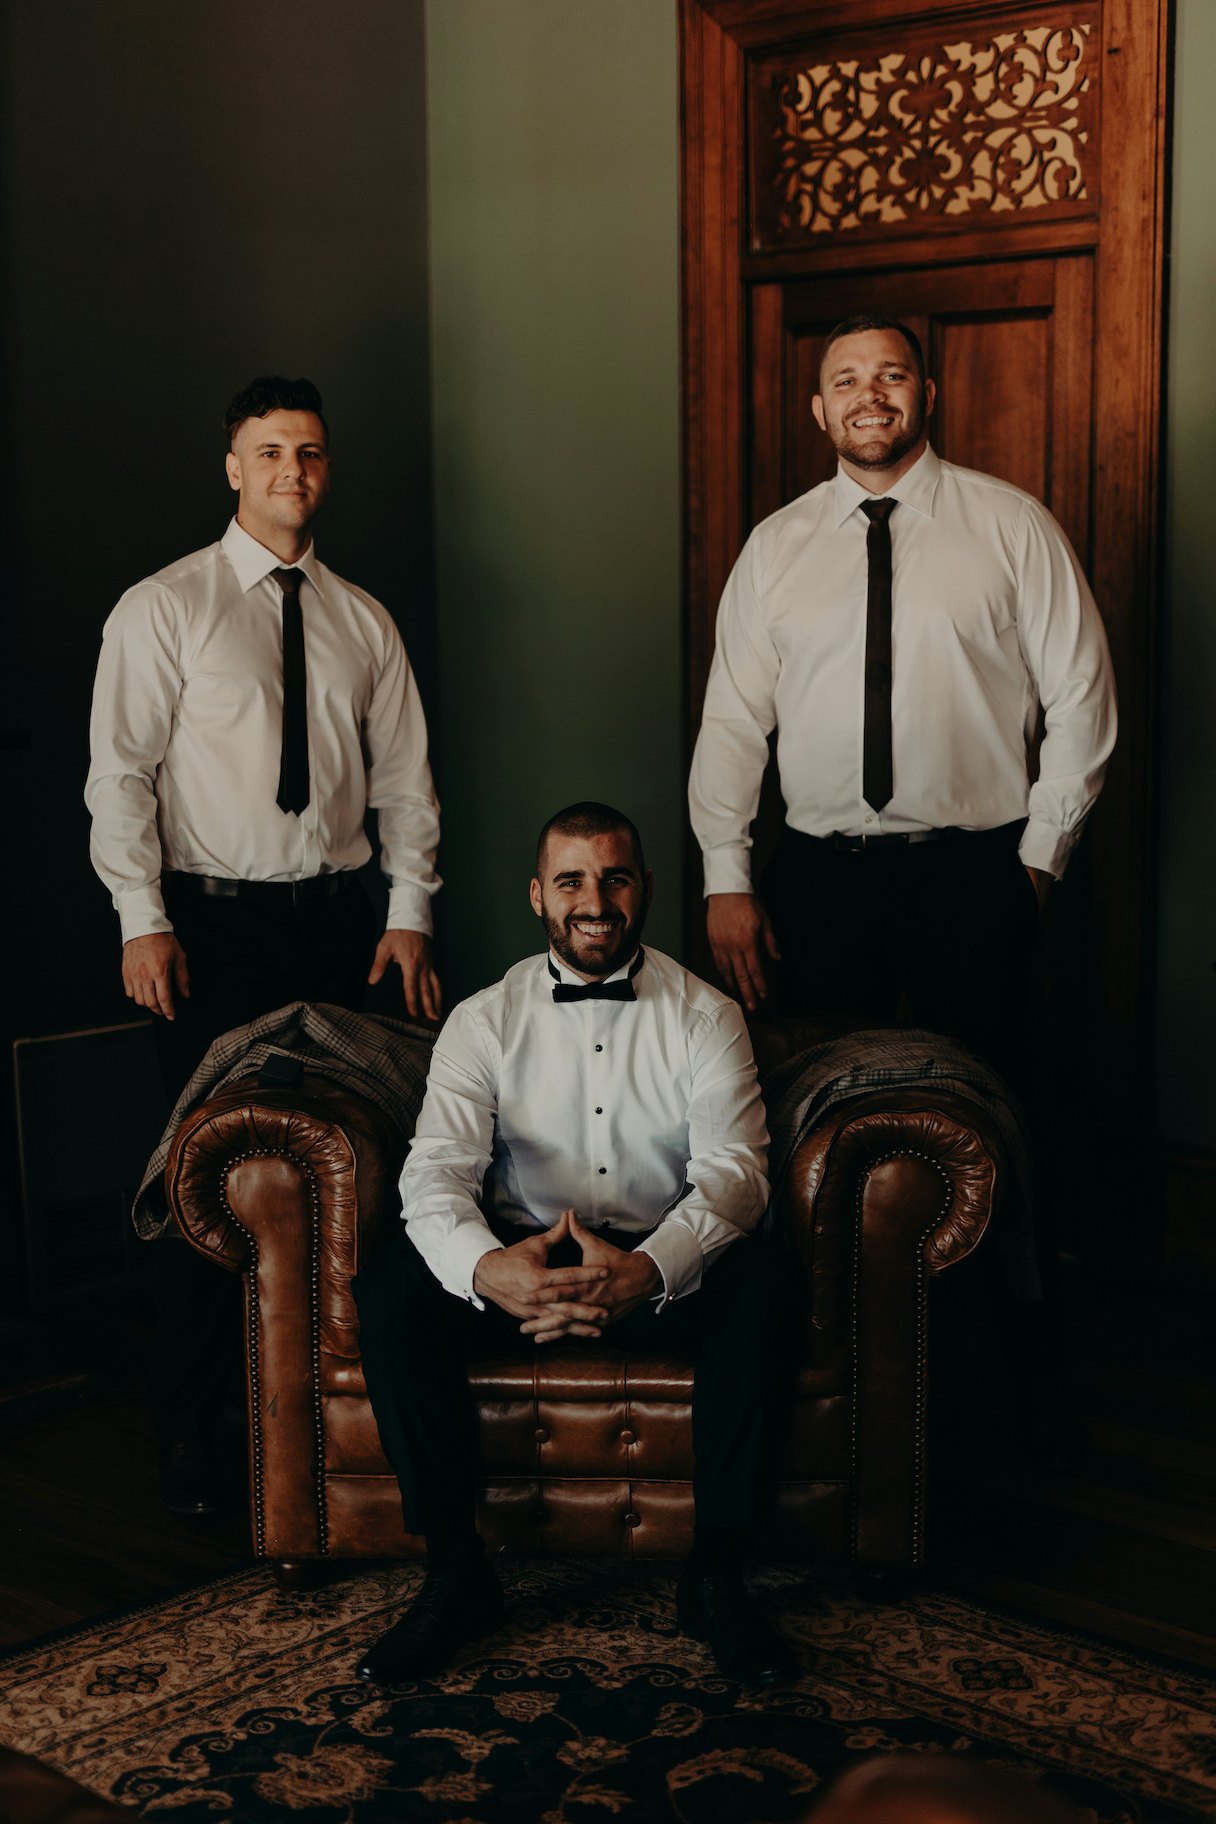 Groomsmen sitting on leather lounges